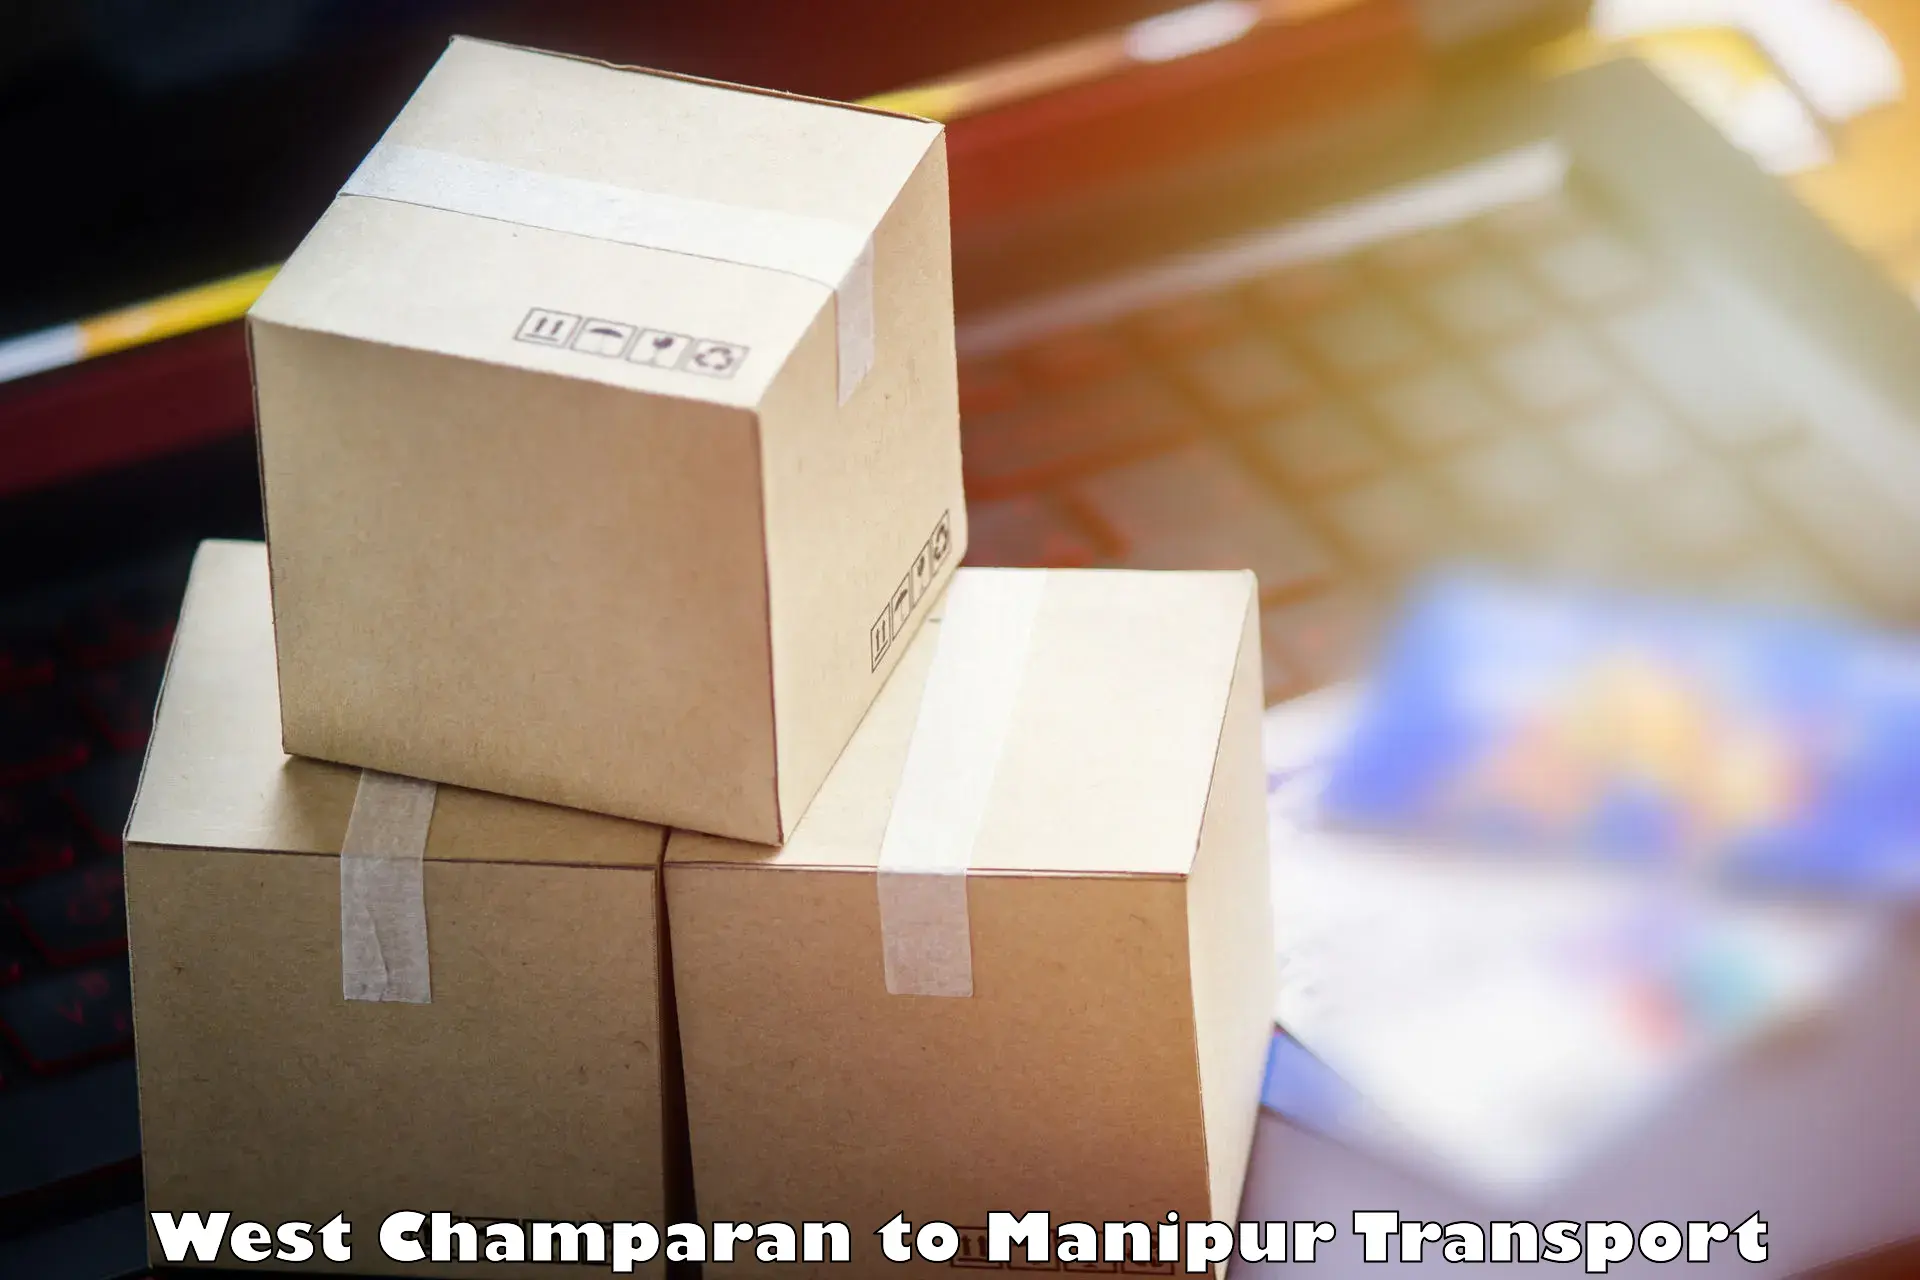 Air freight transport services in West Champaran to Manipur